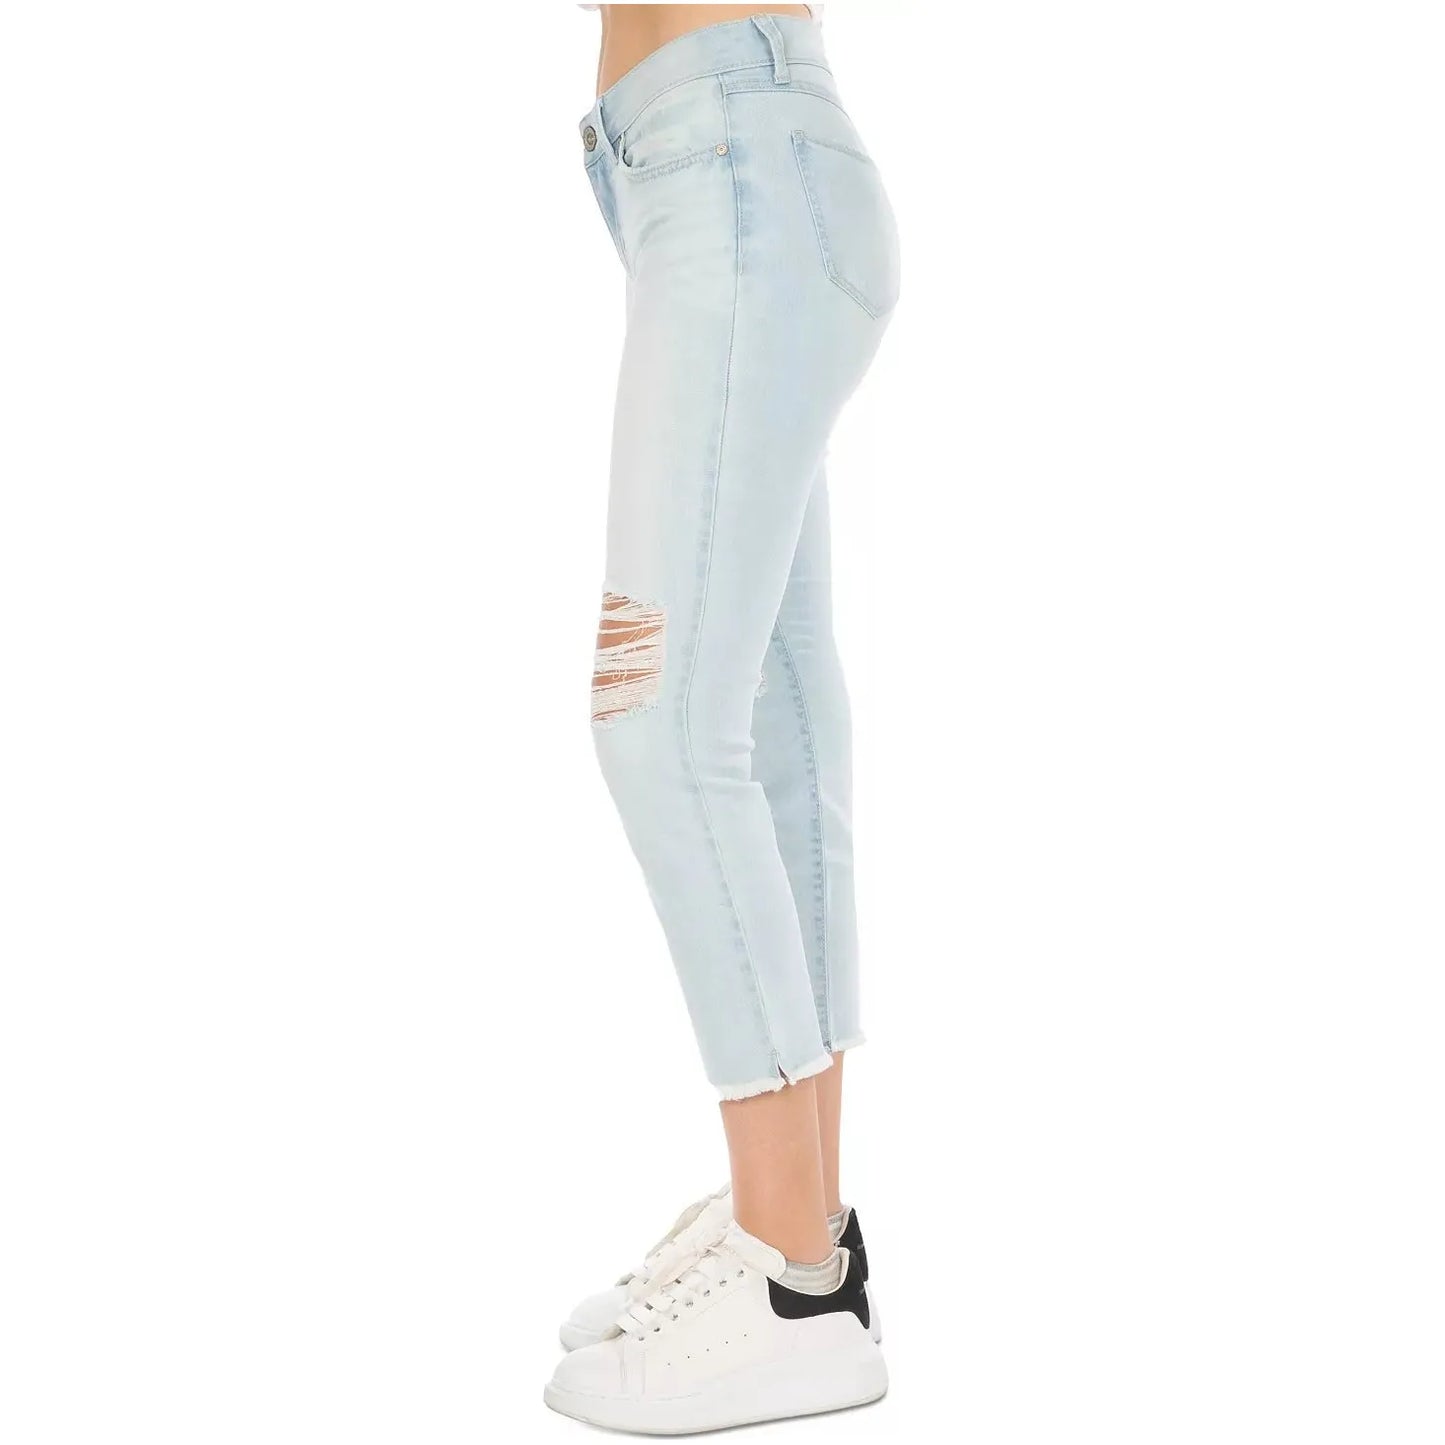 Rewash Juniors Distressed Cropped Skinny Jeans, Blue, Size: 5 (Small)